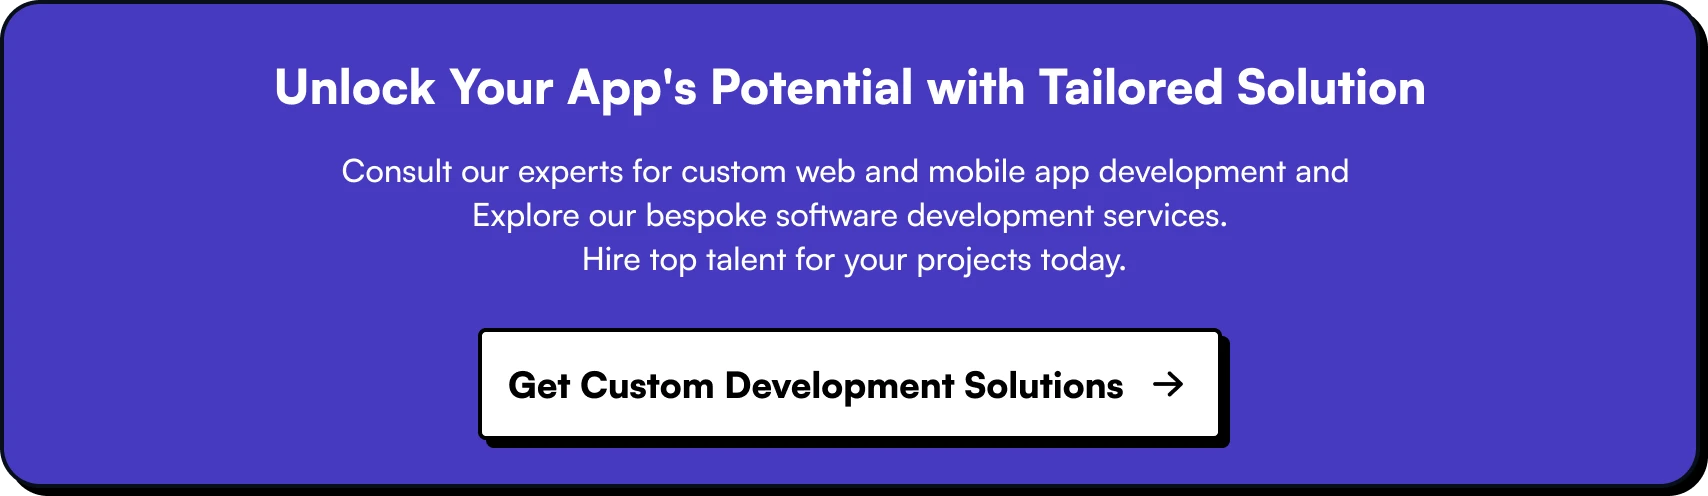 Unlock Your App's Potential with BeSpoke Solution. Consult our experts for custom web and mobile app development and Explore our bespoke software development services. Hire top talent for your projects today.